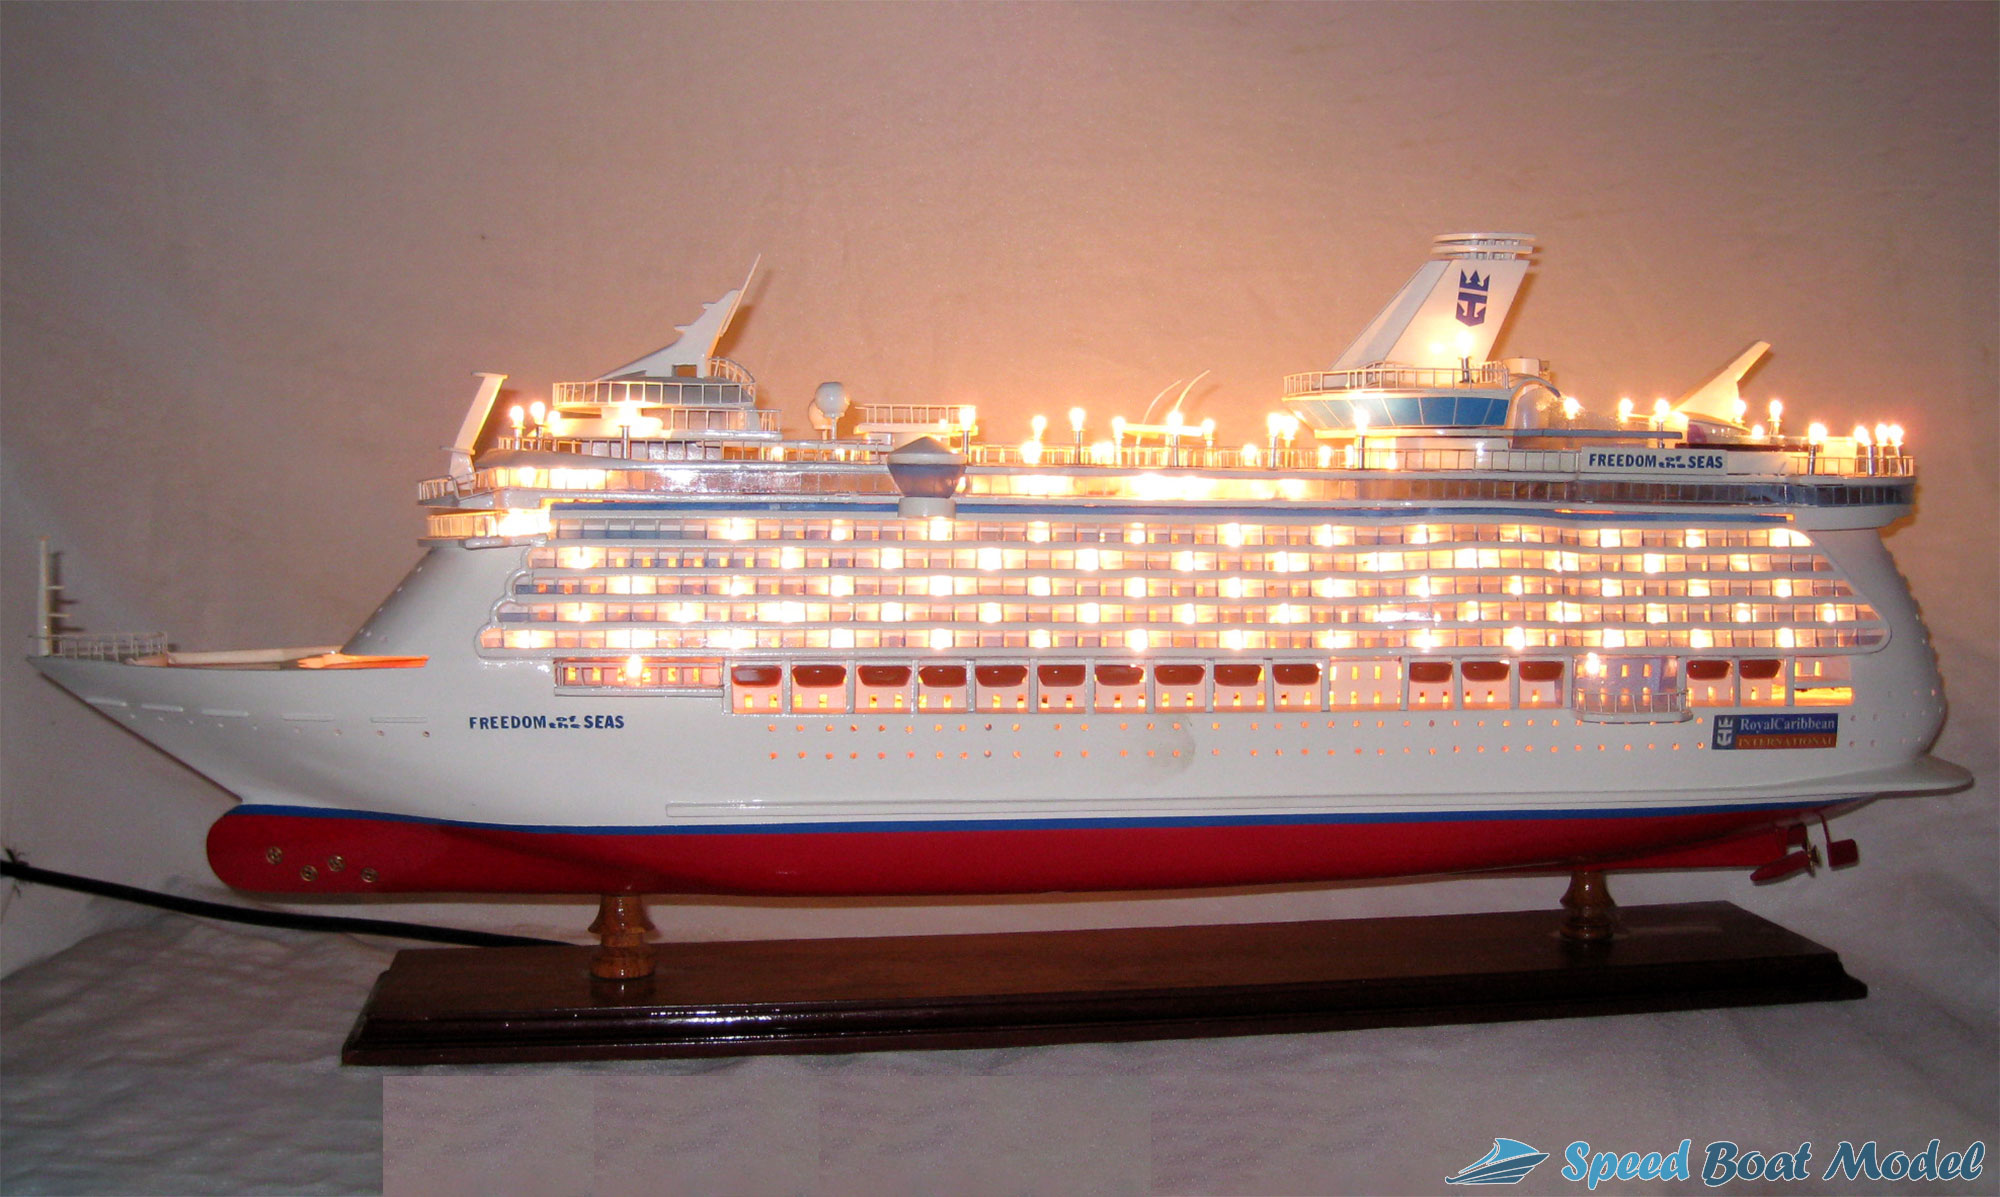 Freedom Of The Seas Boat Model With Light 31.4"